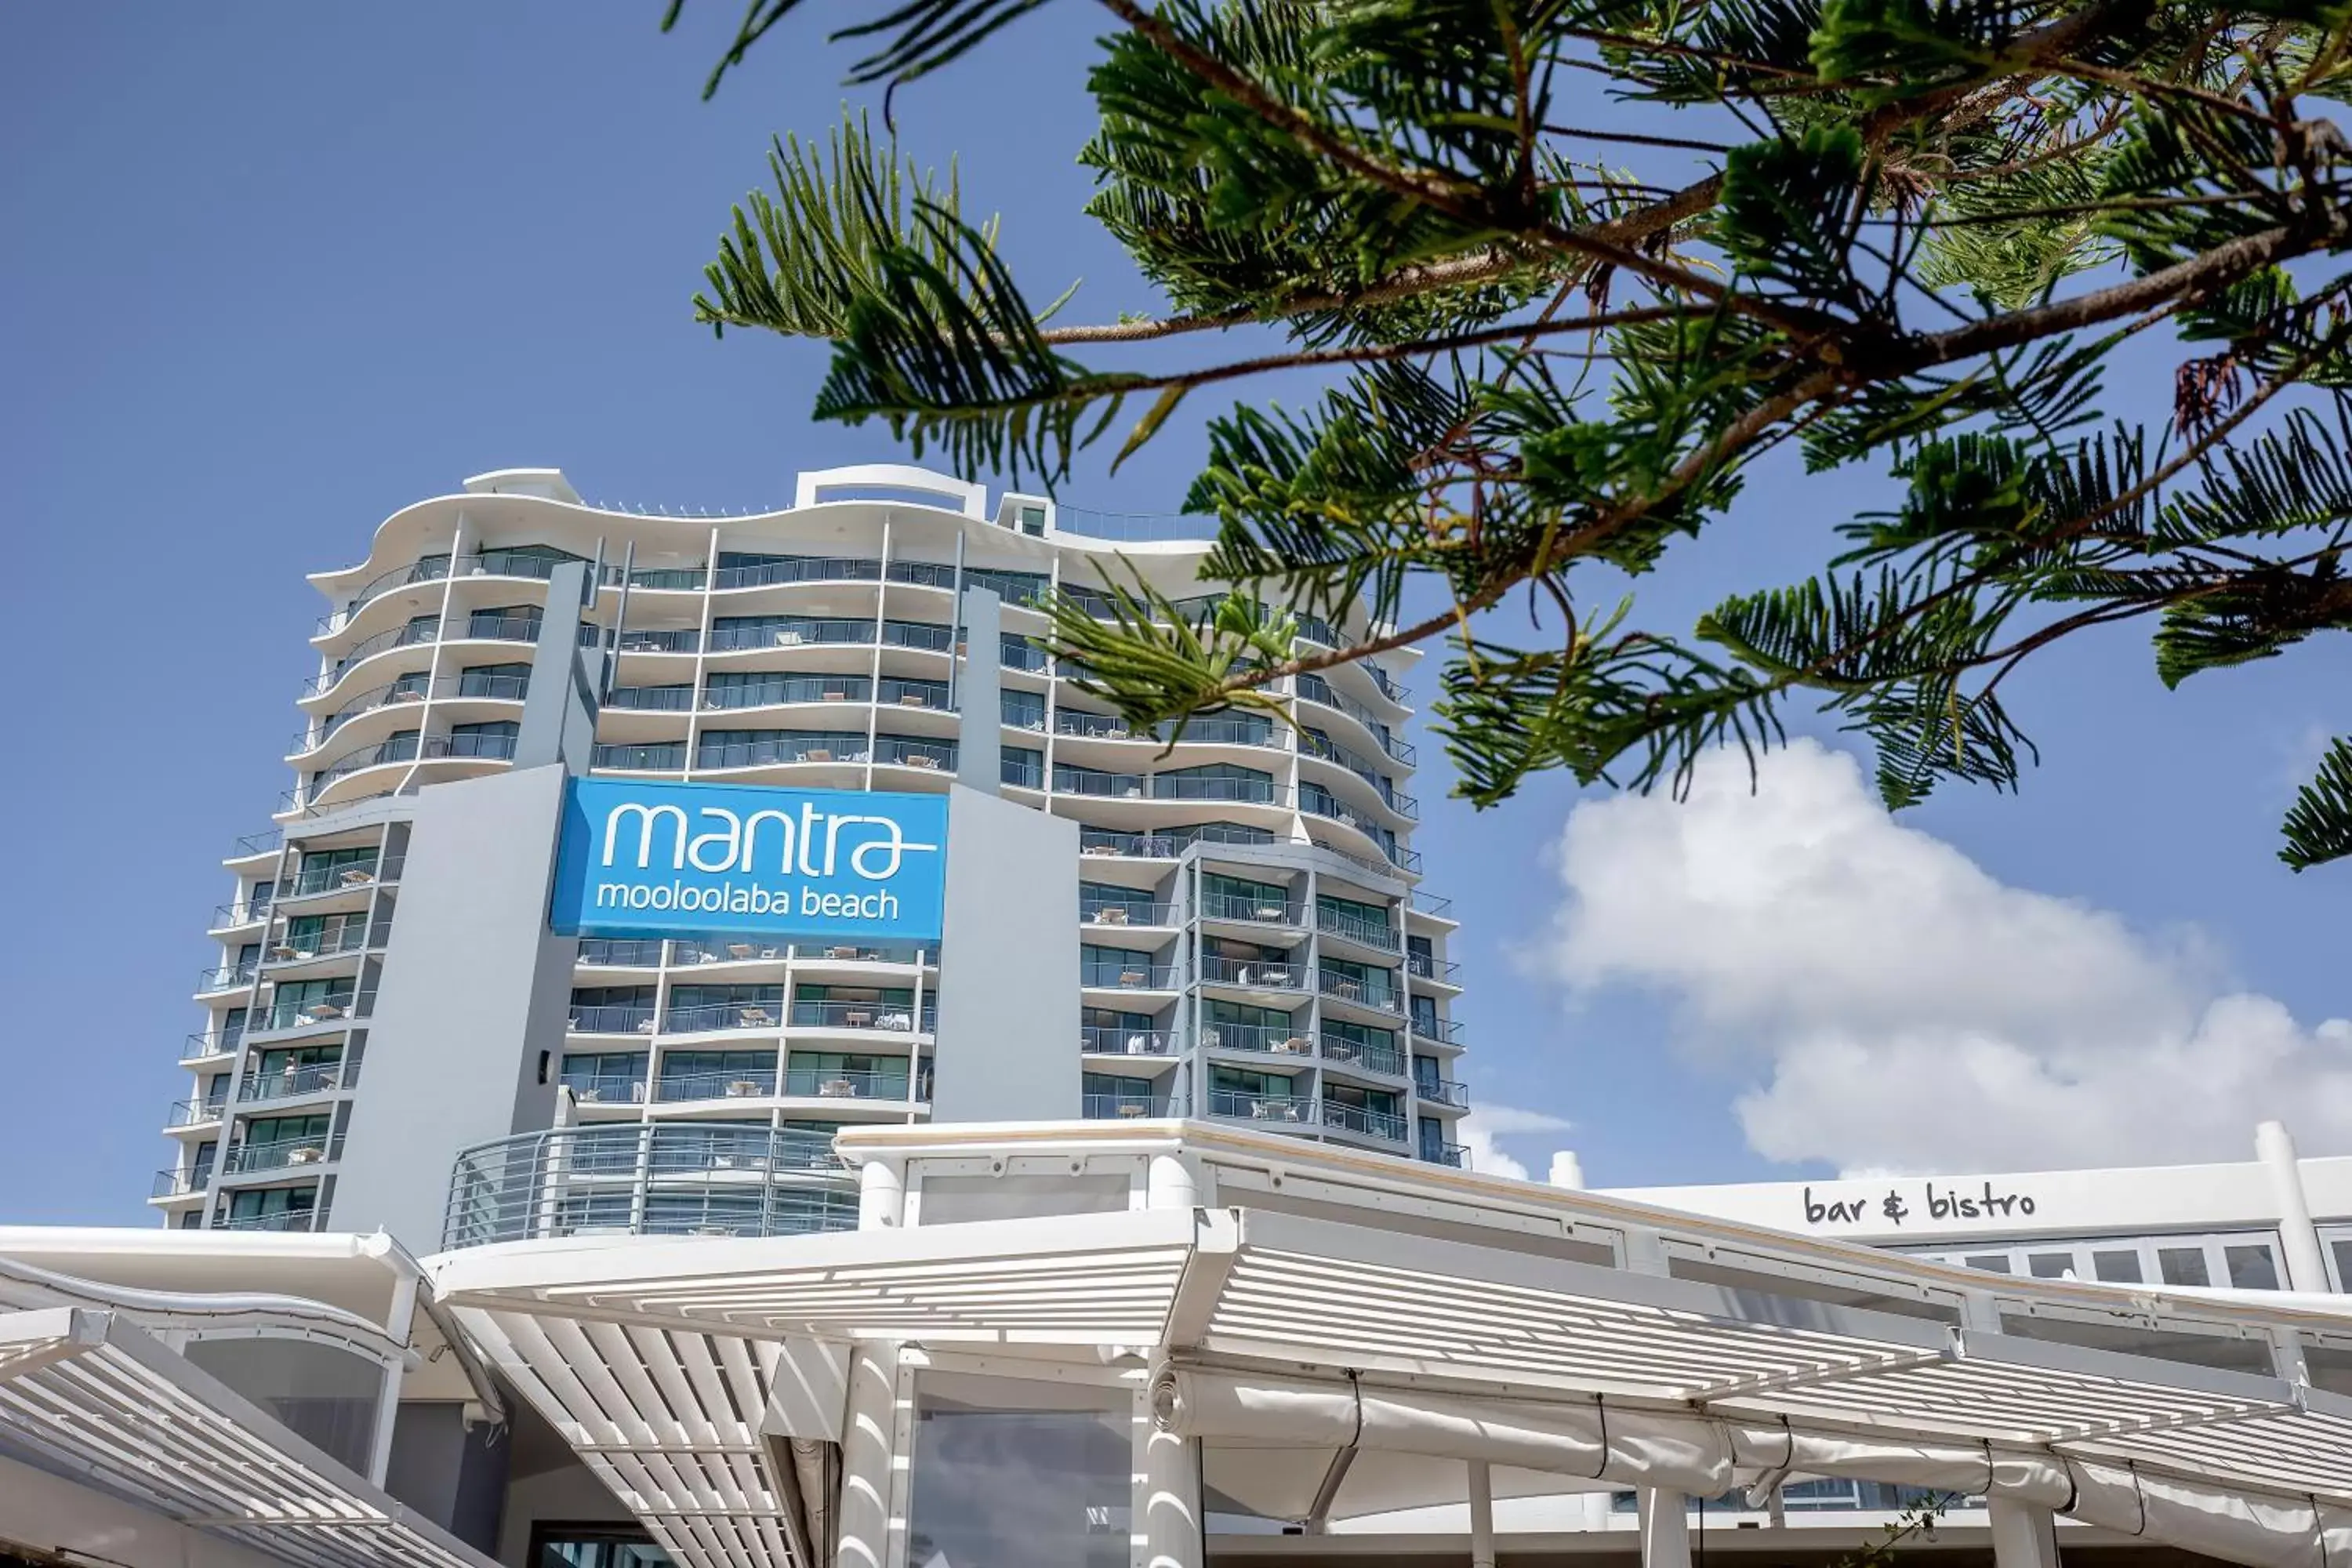 Property building in Mantra Mooloolaba Beach